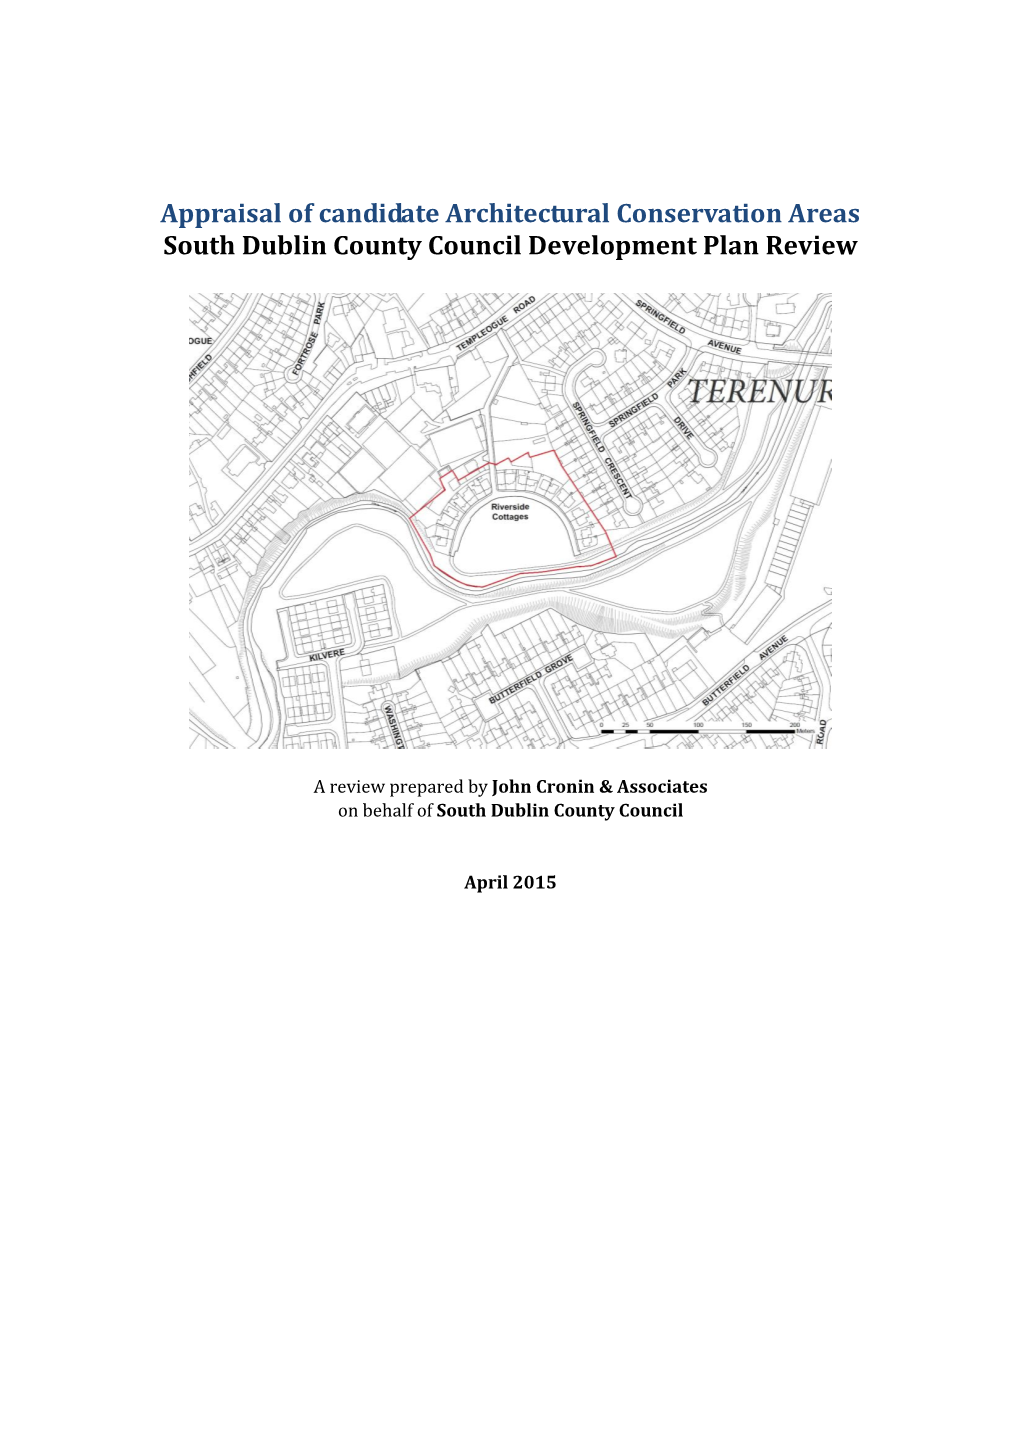 Appraisal of Candidate Architectural Conservation Areas South Dublin County Council Development Plan Review